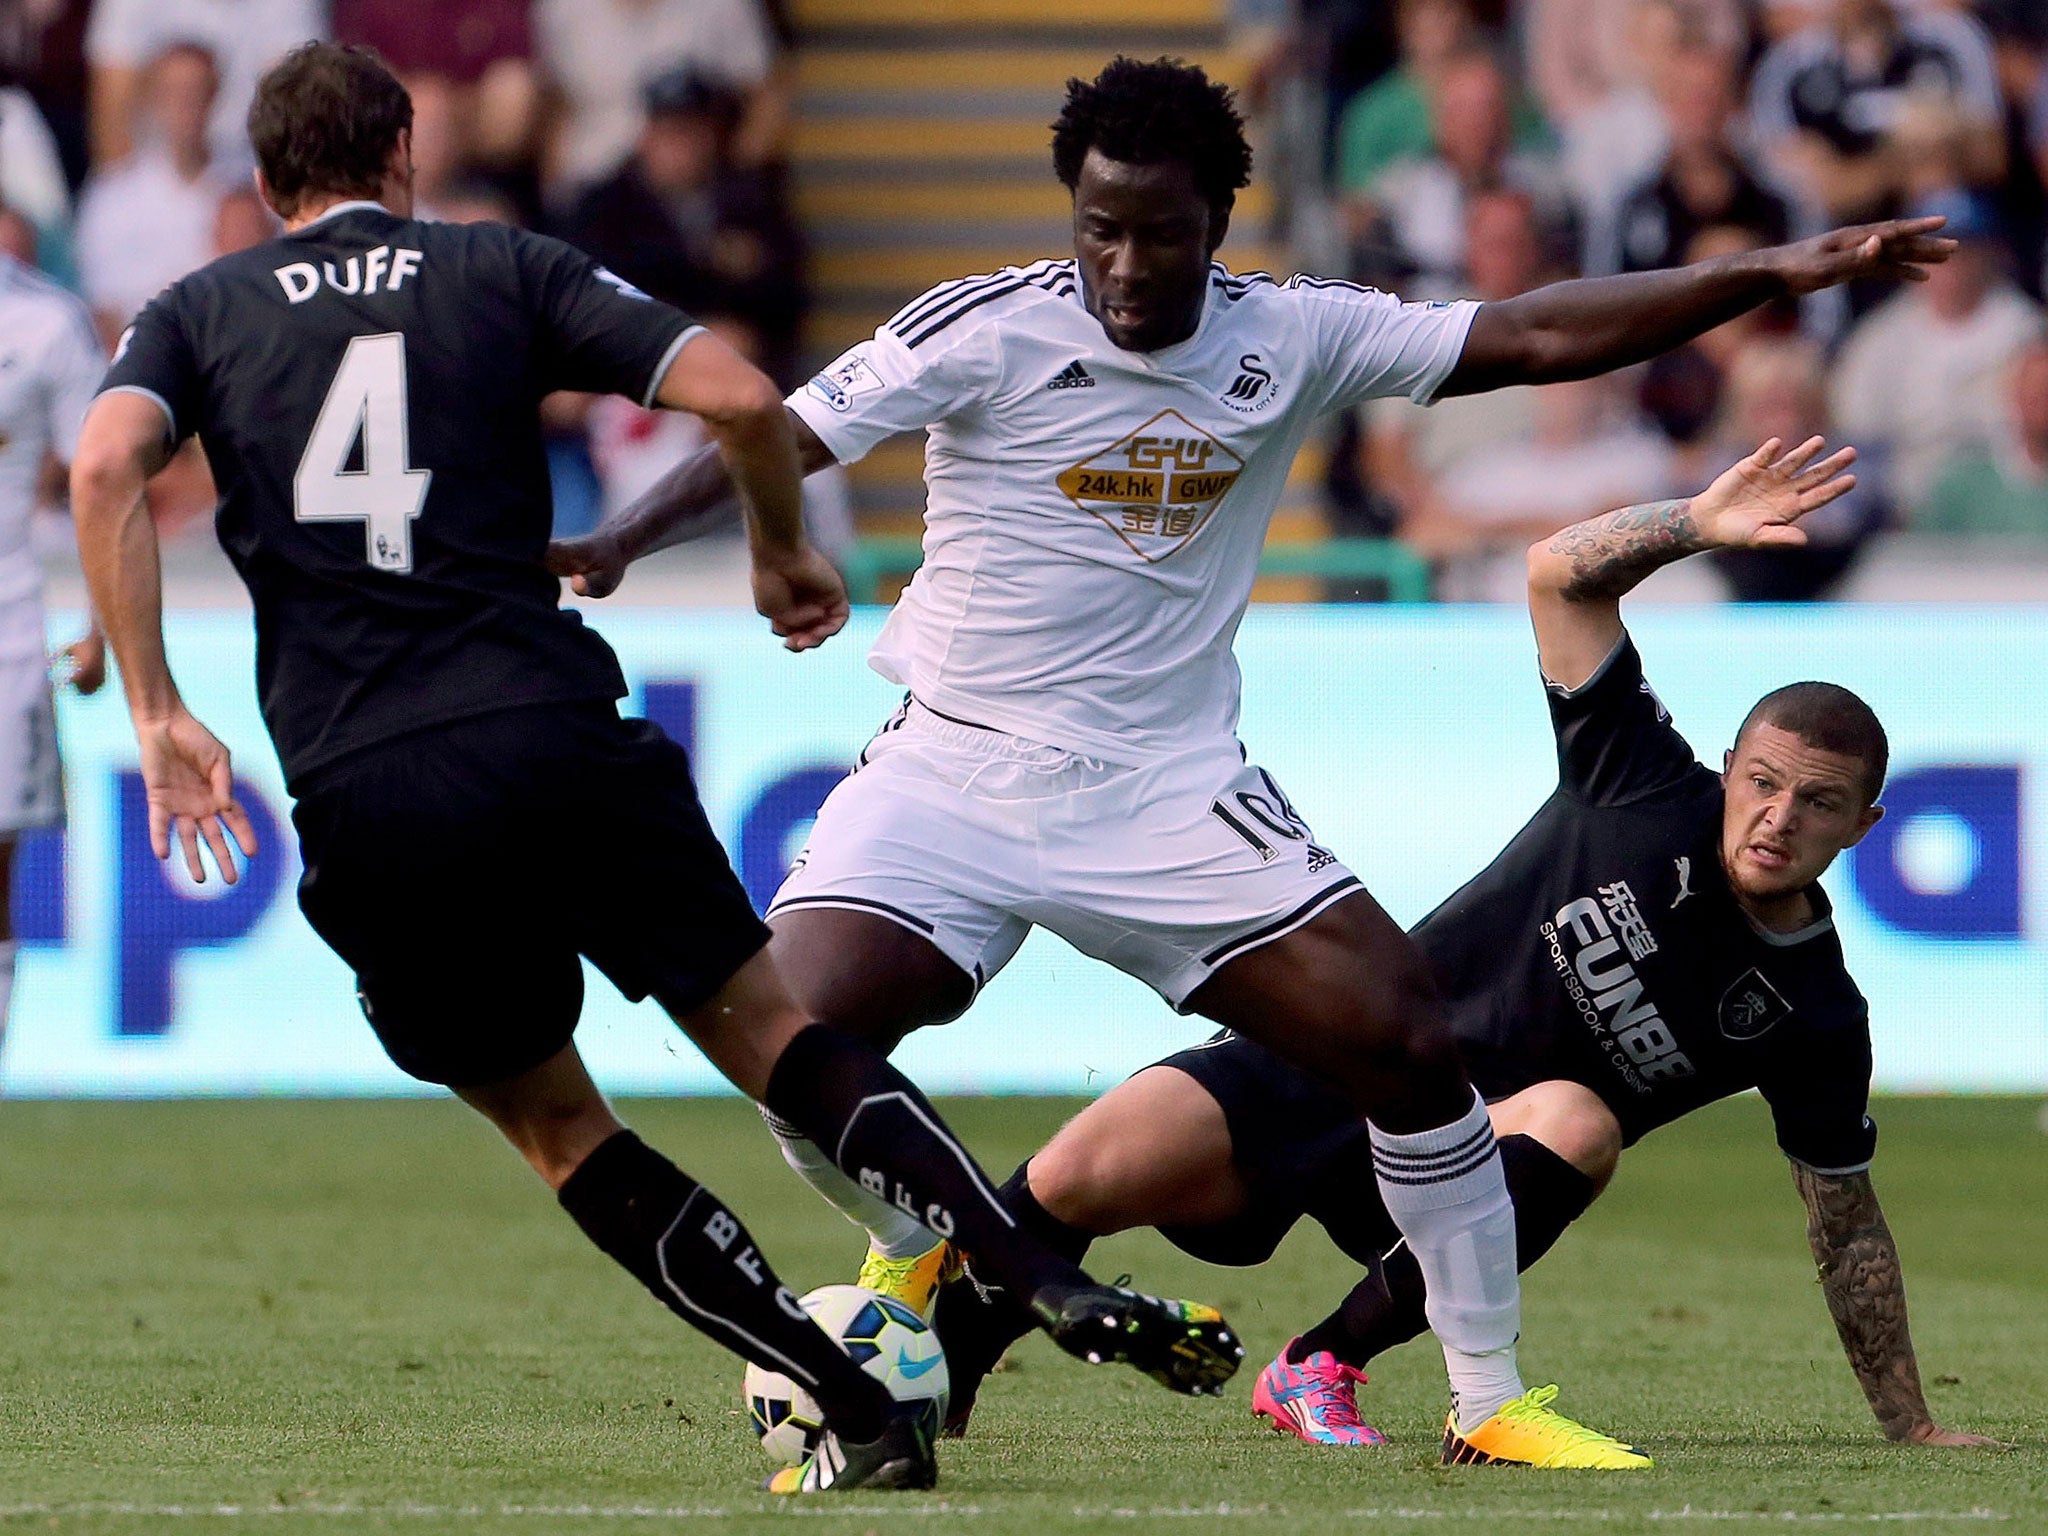 Swansea City have not yet received any offers for Wilfried Bony, says Garry Monk